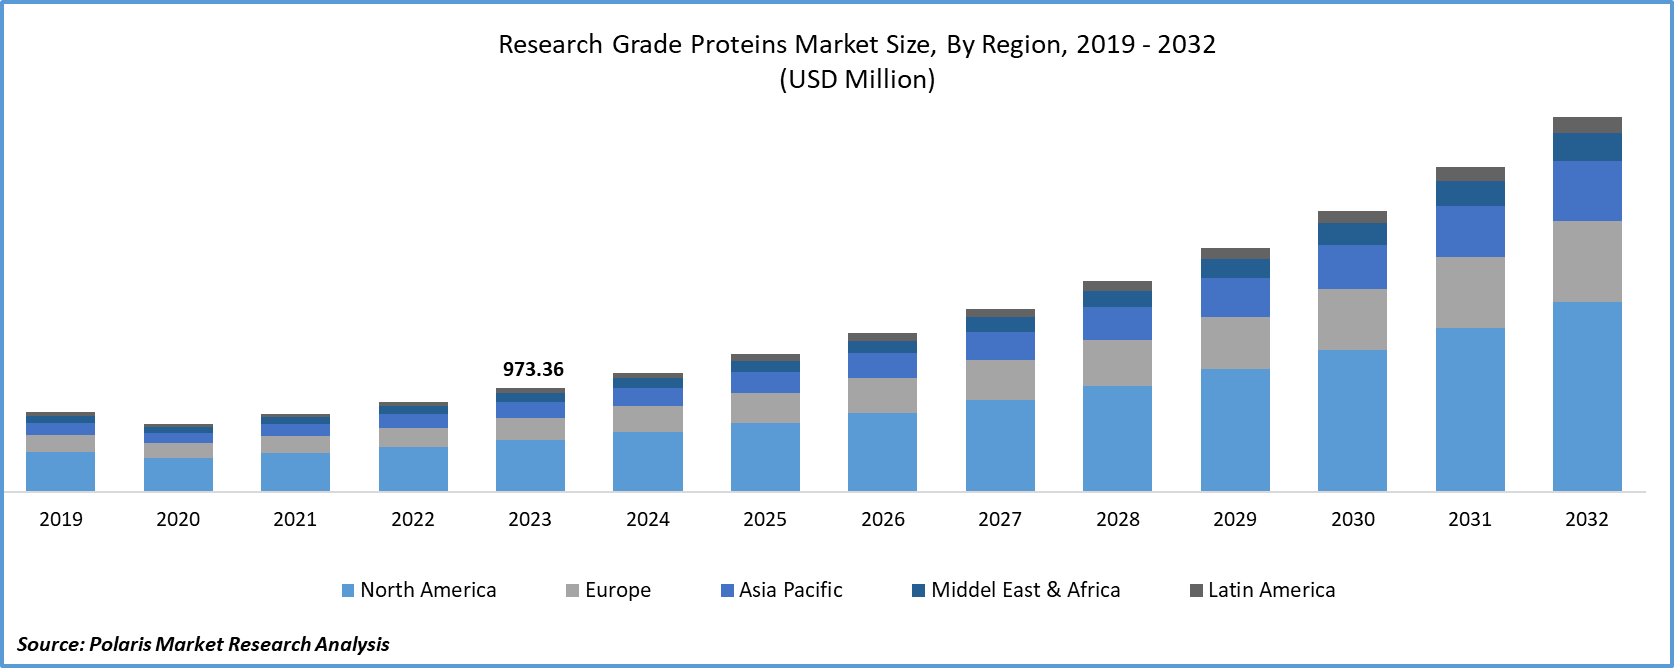 Research Grade Proteins Market Size